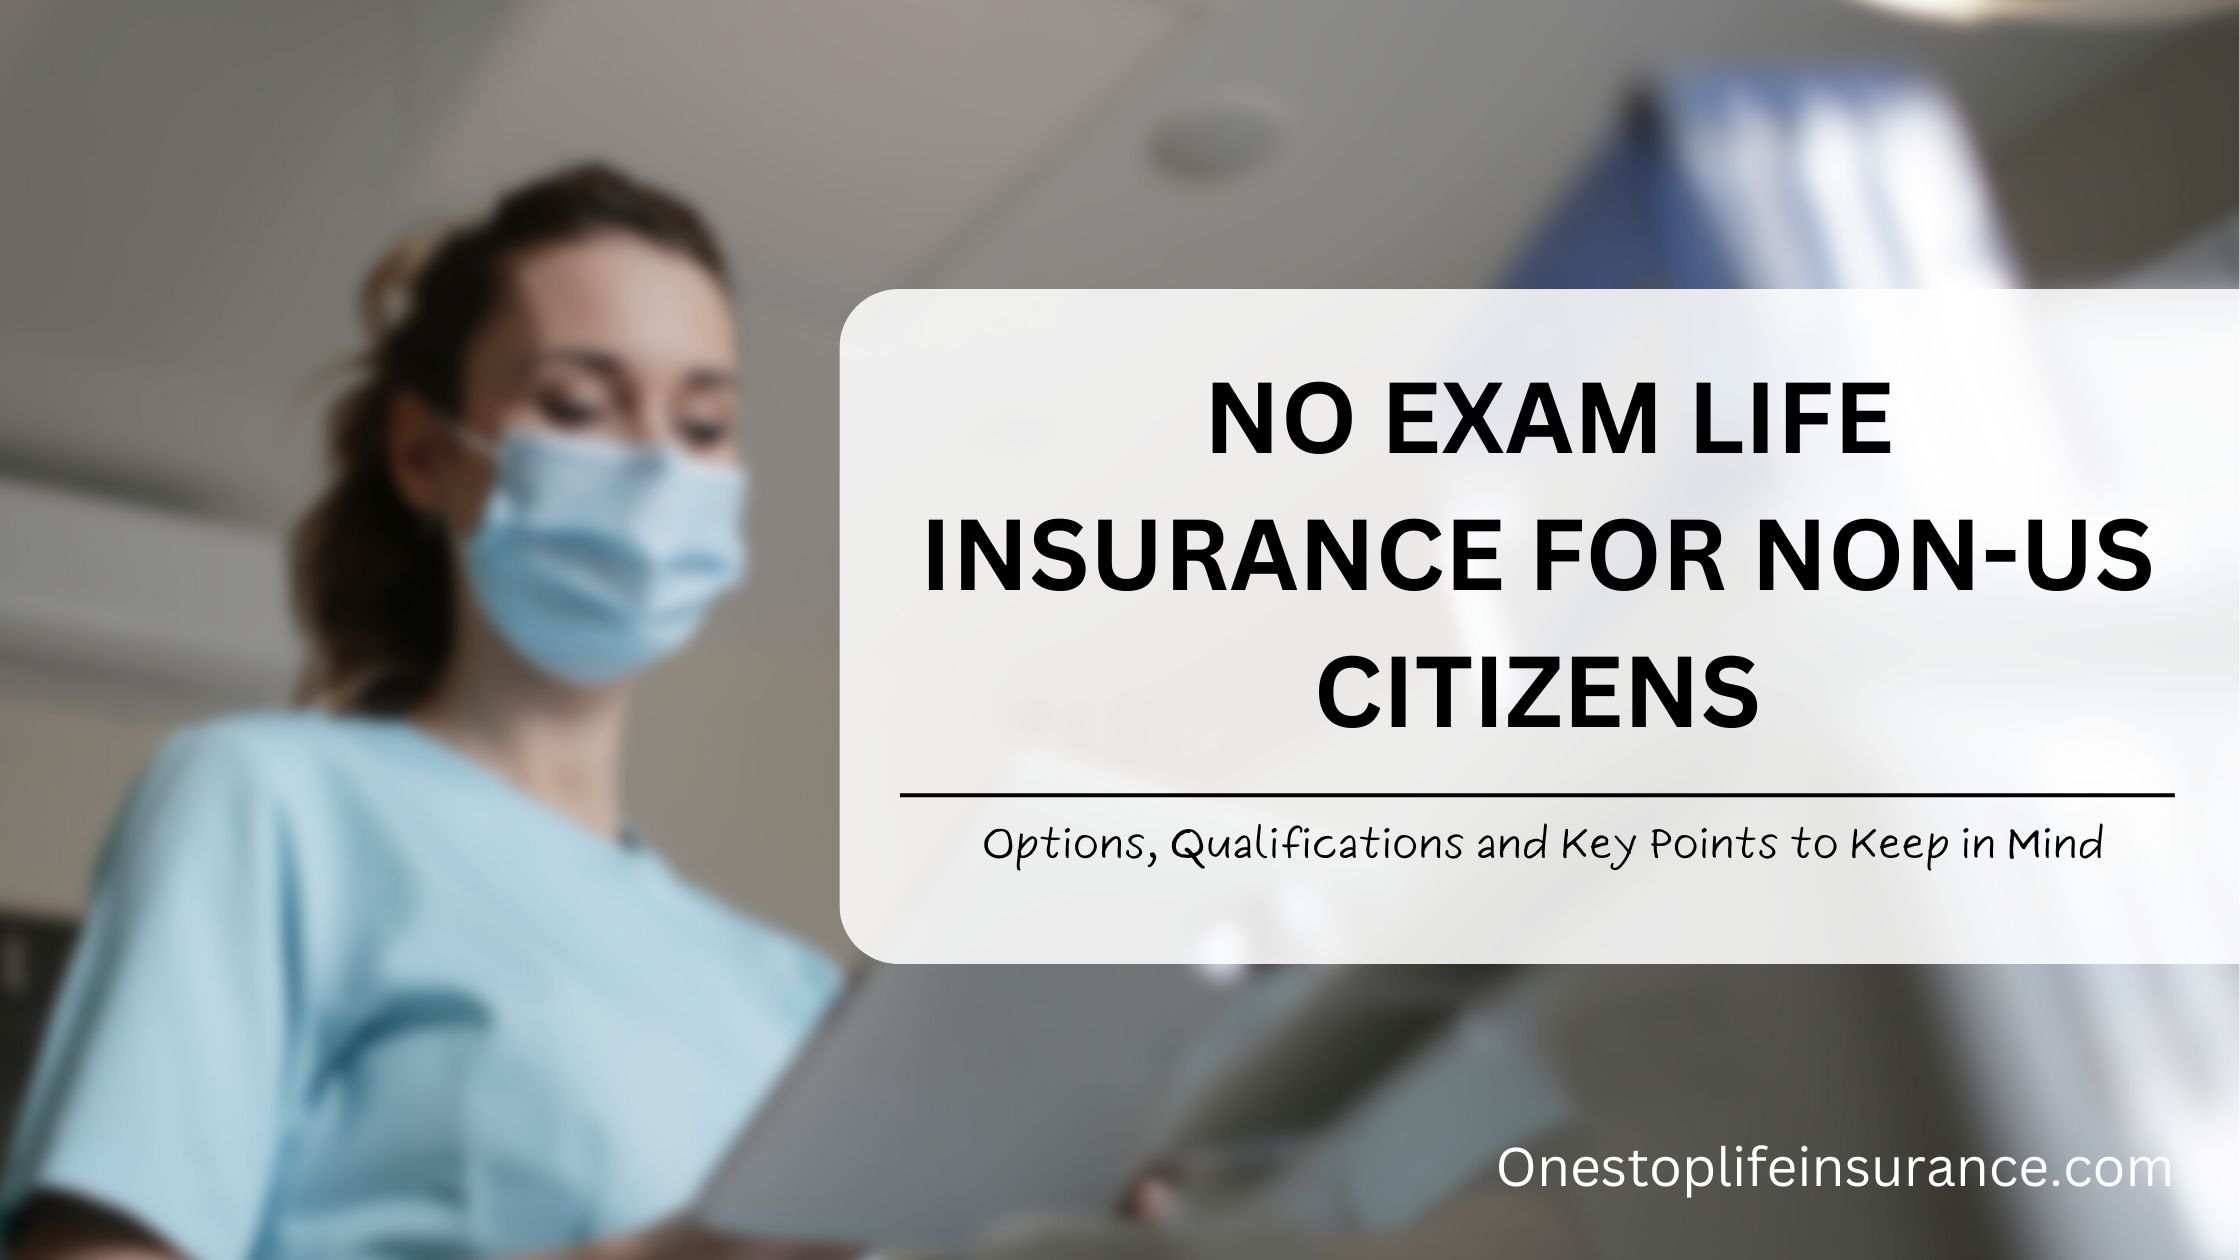 No exam life insurance for non-us citizens options, qualifications and key points to keep in mind